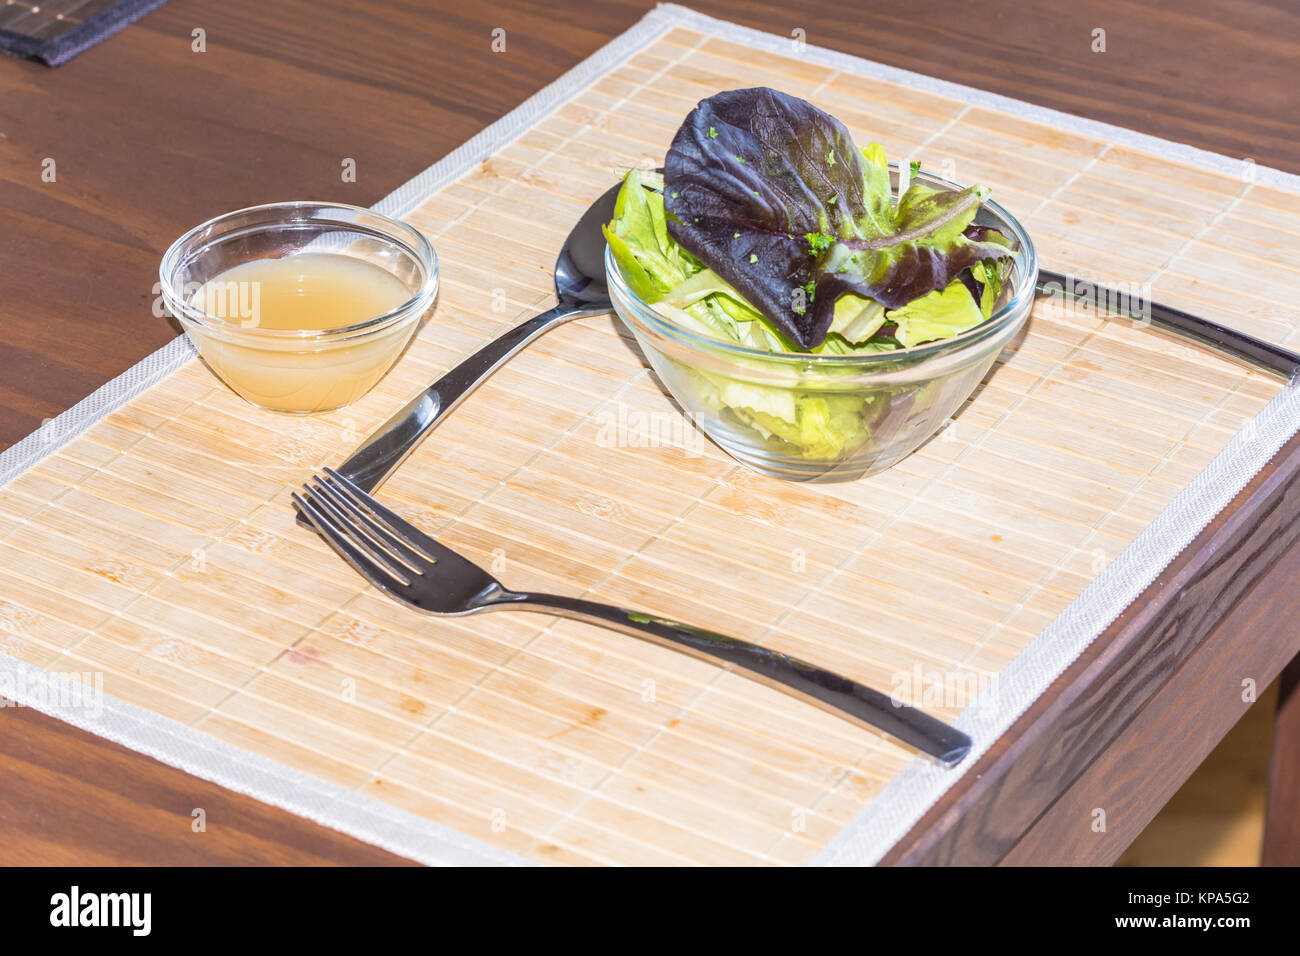 a table laid with cutlery Stock Photo